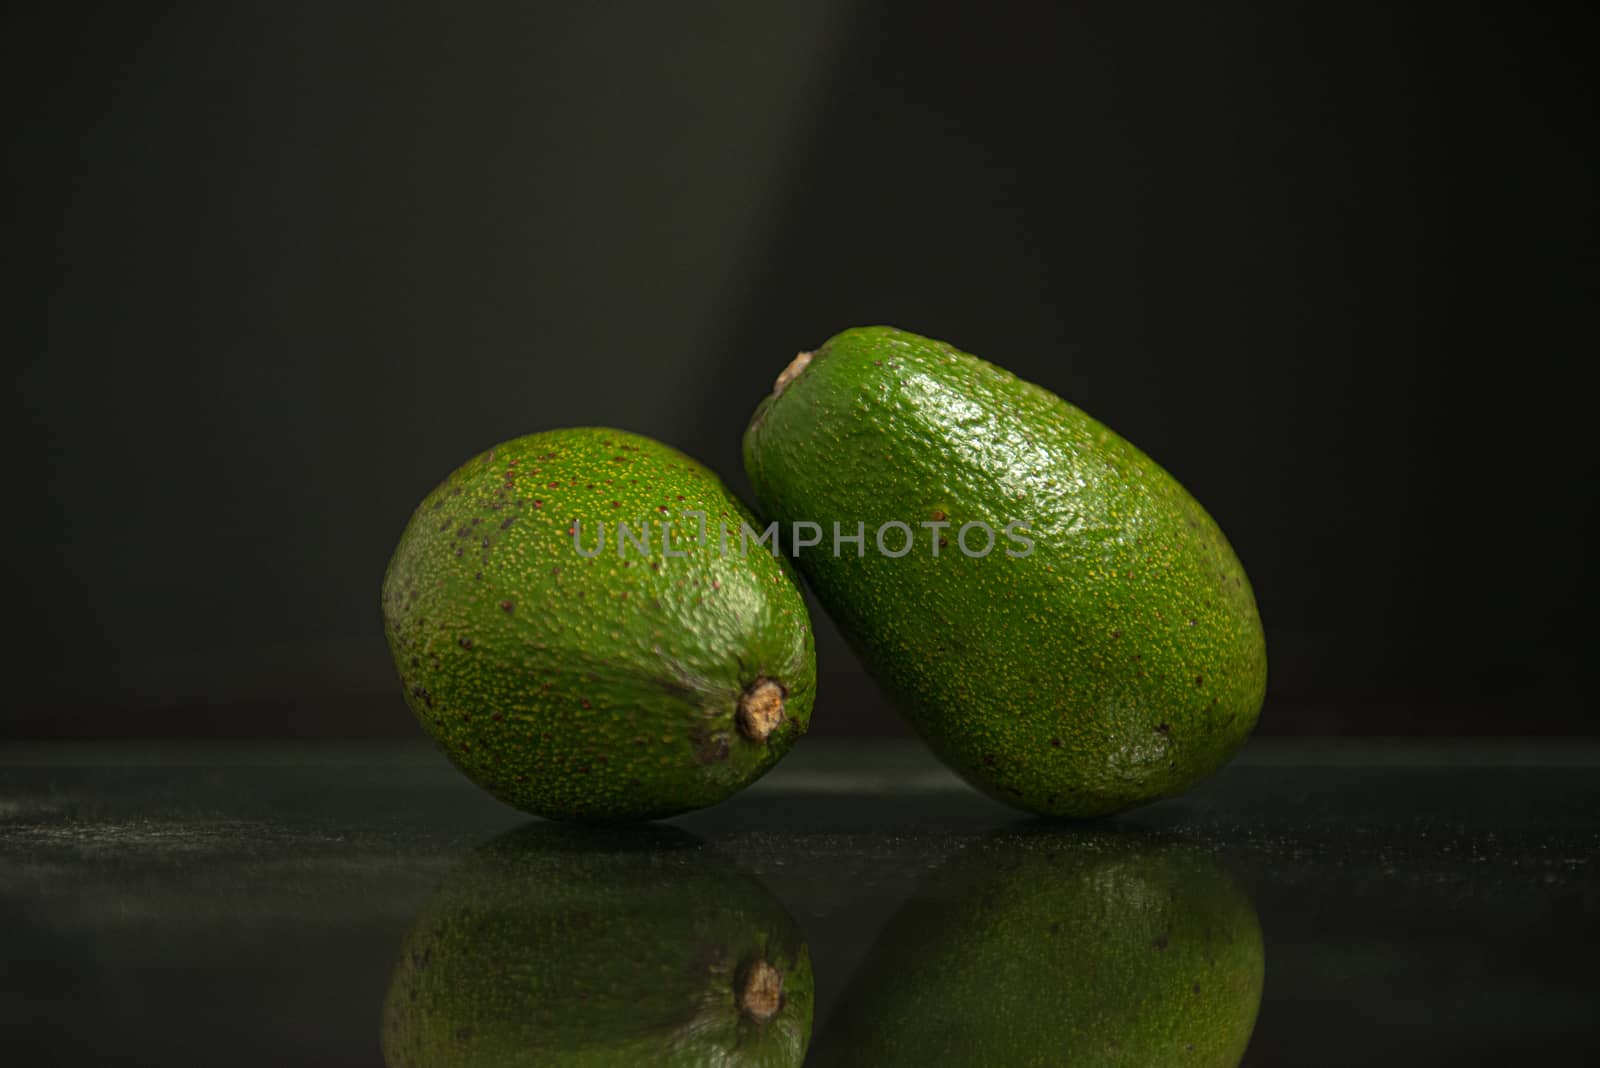 Group of two whole avocados on a black background